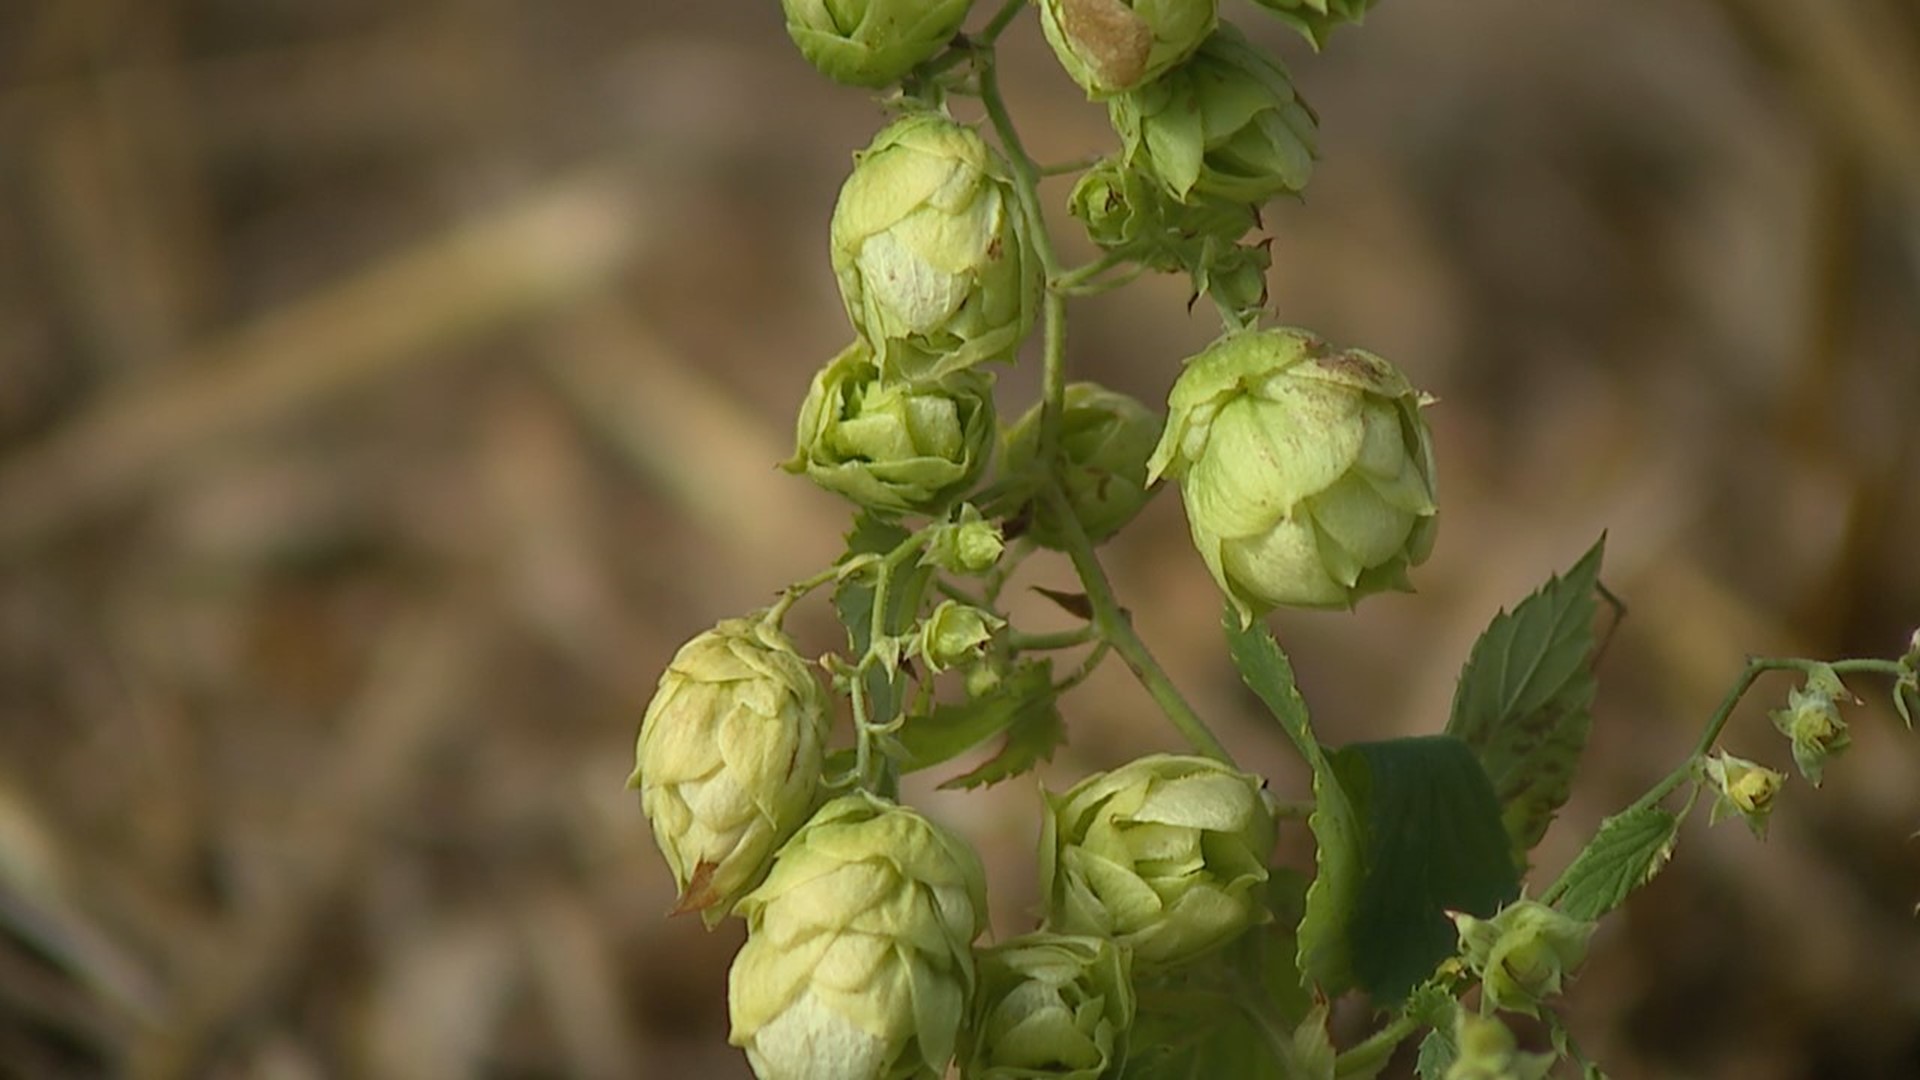 Great Revivalist Brew Lab started growing hops three years ago and is now finally able to harvest the crop.